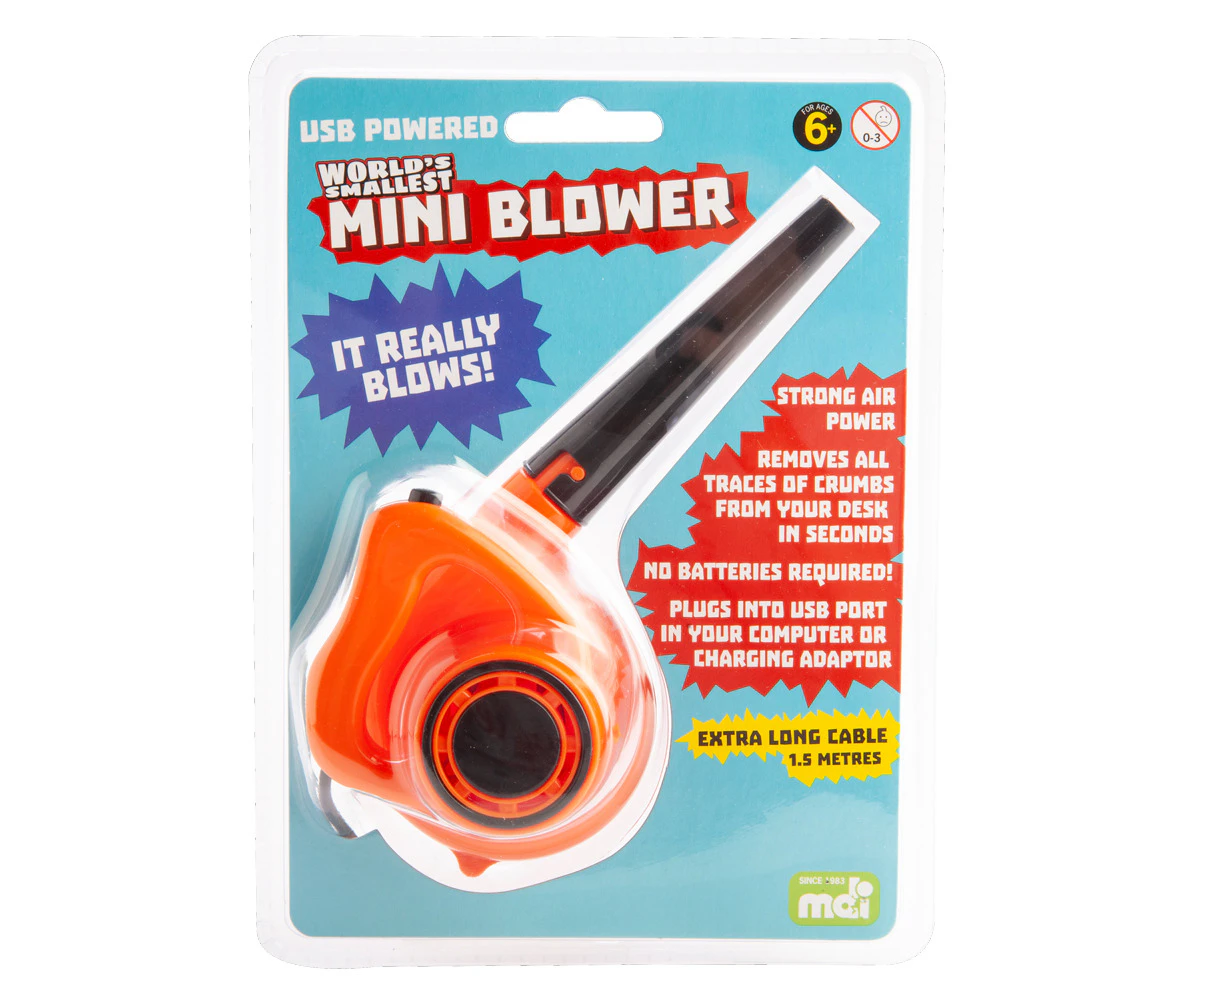 World's Smallest Blower by Westminster Inc.